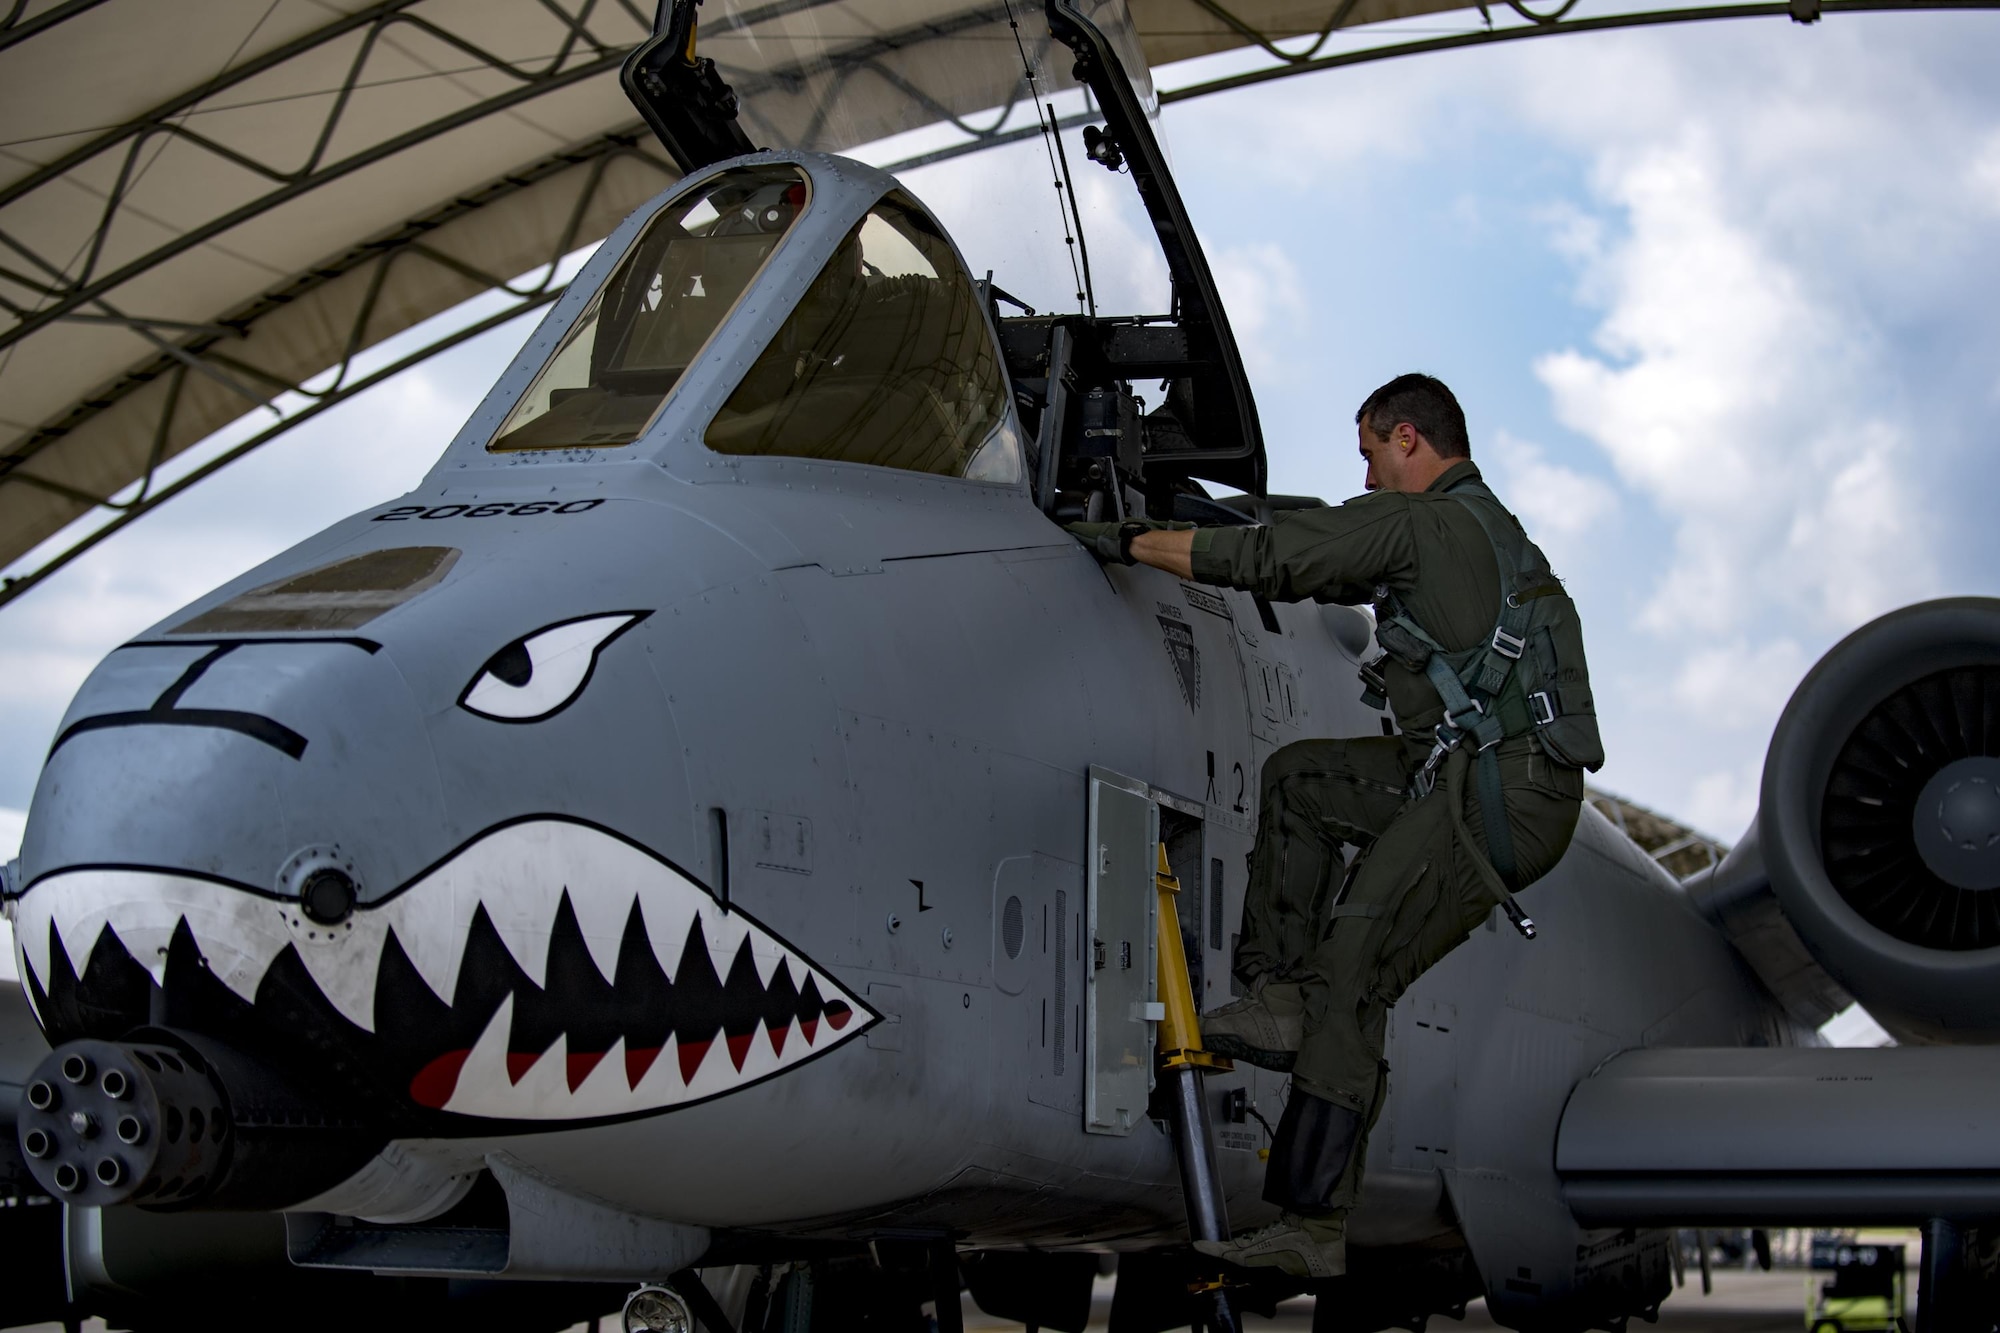 U.S. Air Force Reserve Maj. Matt Paetzhold, 76th Fighter Squadron A-10C Thunderbolt II instructor pilot, climbs aboard an A-10C Thunderbolt II, Sept. 9, 2017, at Moody Air Force Base, Ga. After graduating the Weapons Instructor Course, Paetzhold joined the Airmen who serve as tactical and operational advisors to military leaders at all levels. Due to the relationship between the 75th FS and 76th FS, Paetzhold is slated to deploy as the 75th FSs weapons officer. (U.S. Air Force photo by Senior Airman Daniel Snider)